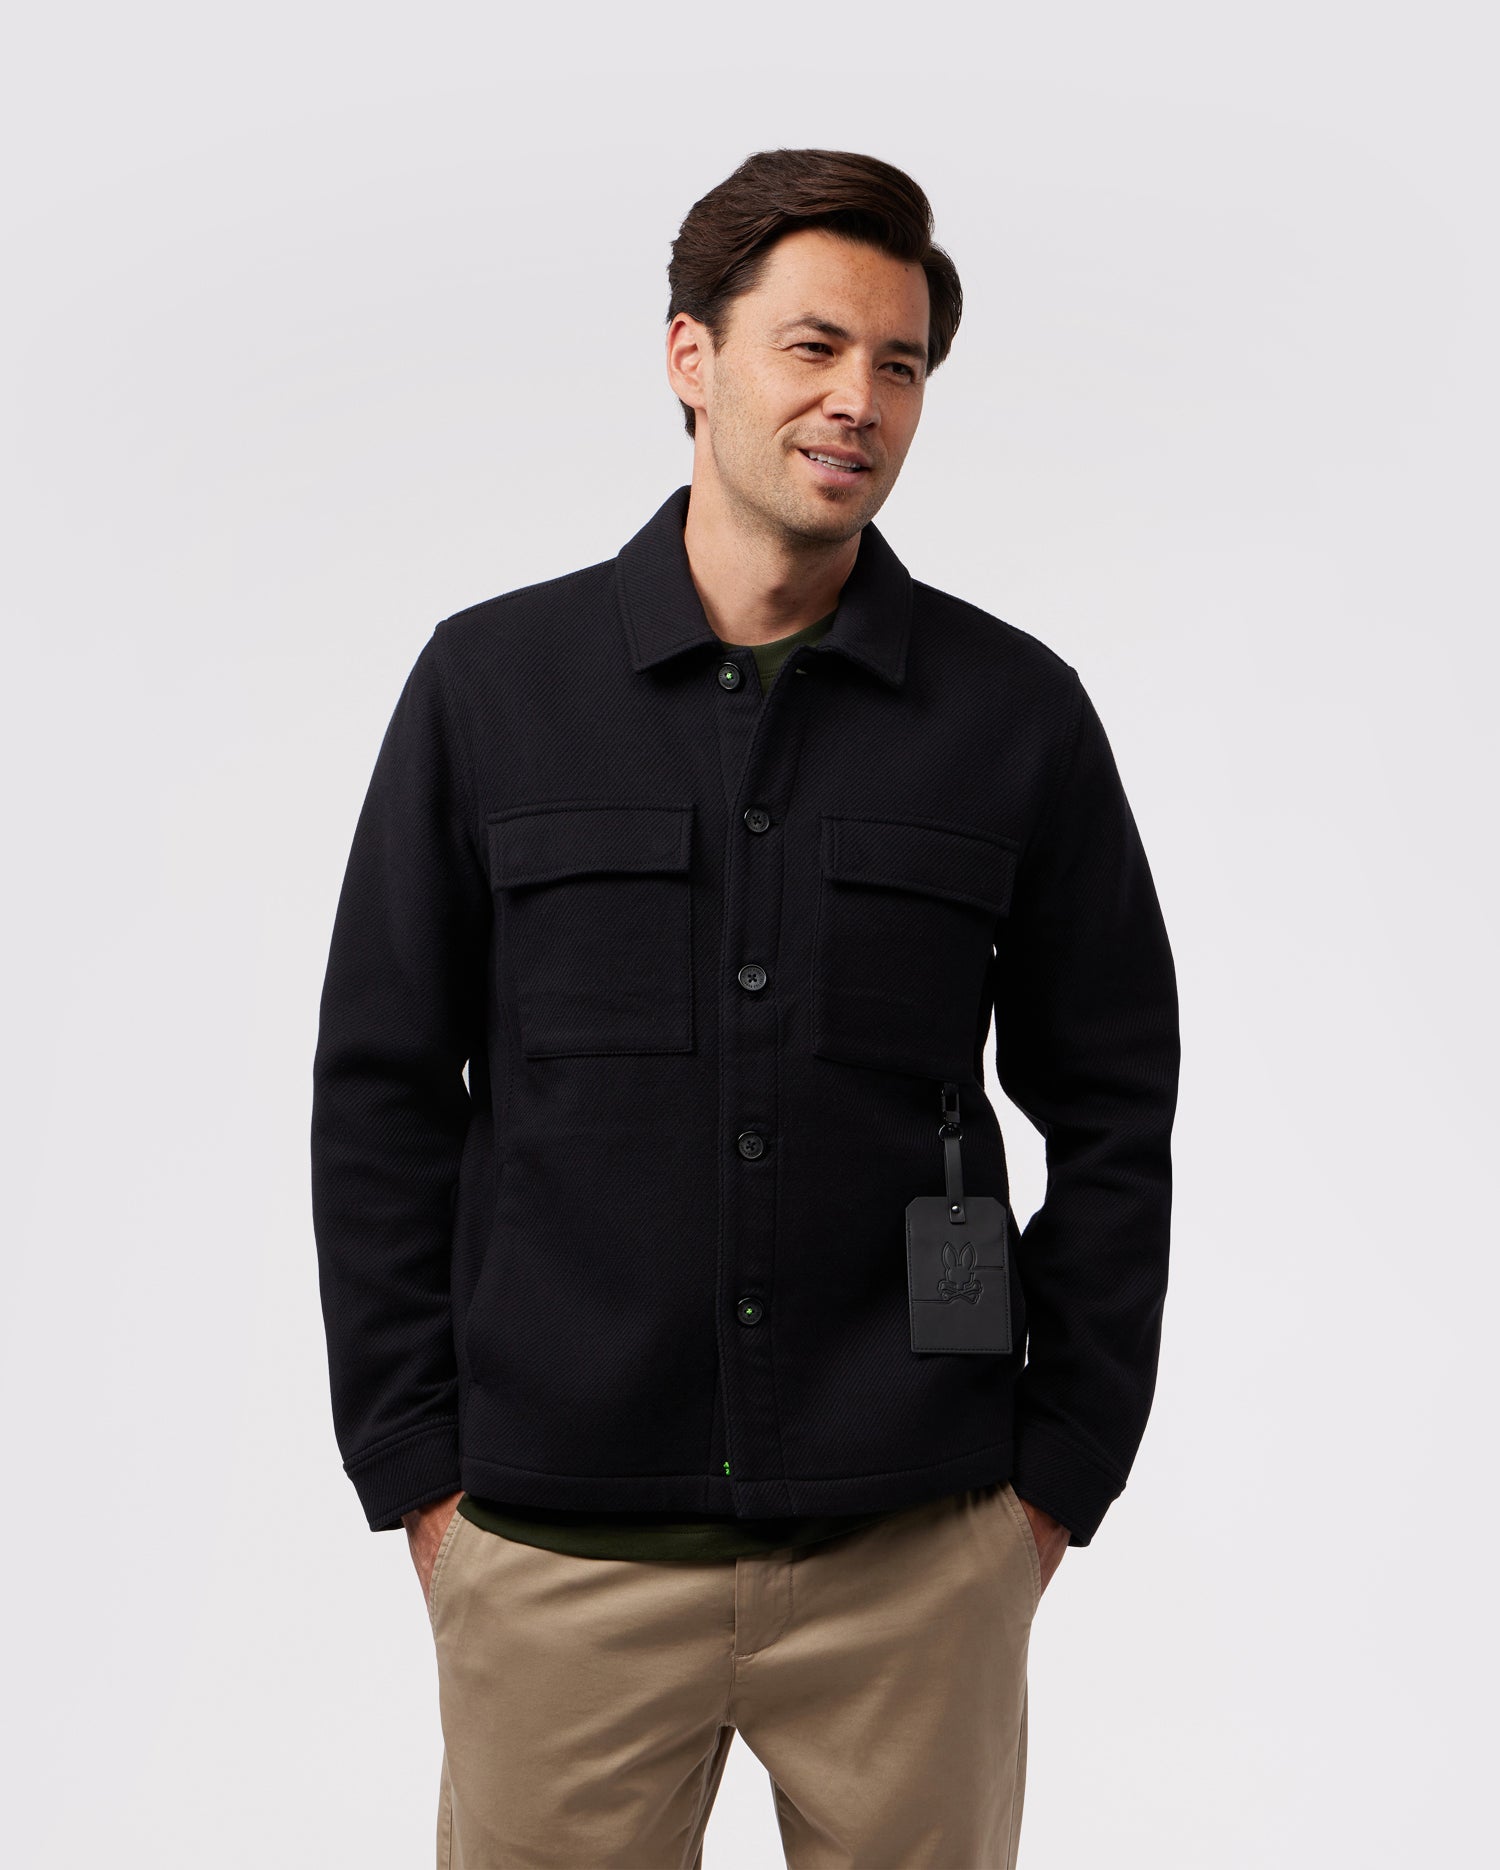 U.S. POLO ASSN. Full Sleeve Solid Men Jacket - Buy U.S. POLO ASSN. Full  Sleeve Solid Men Jacket Online at Best Prices in India | Flipkart.com